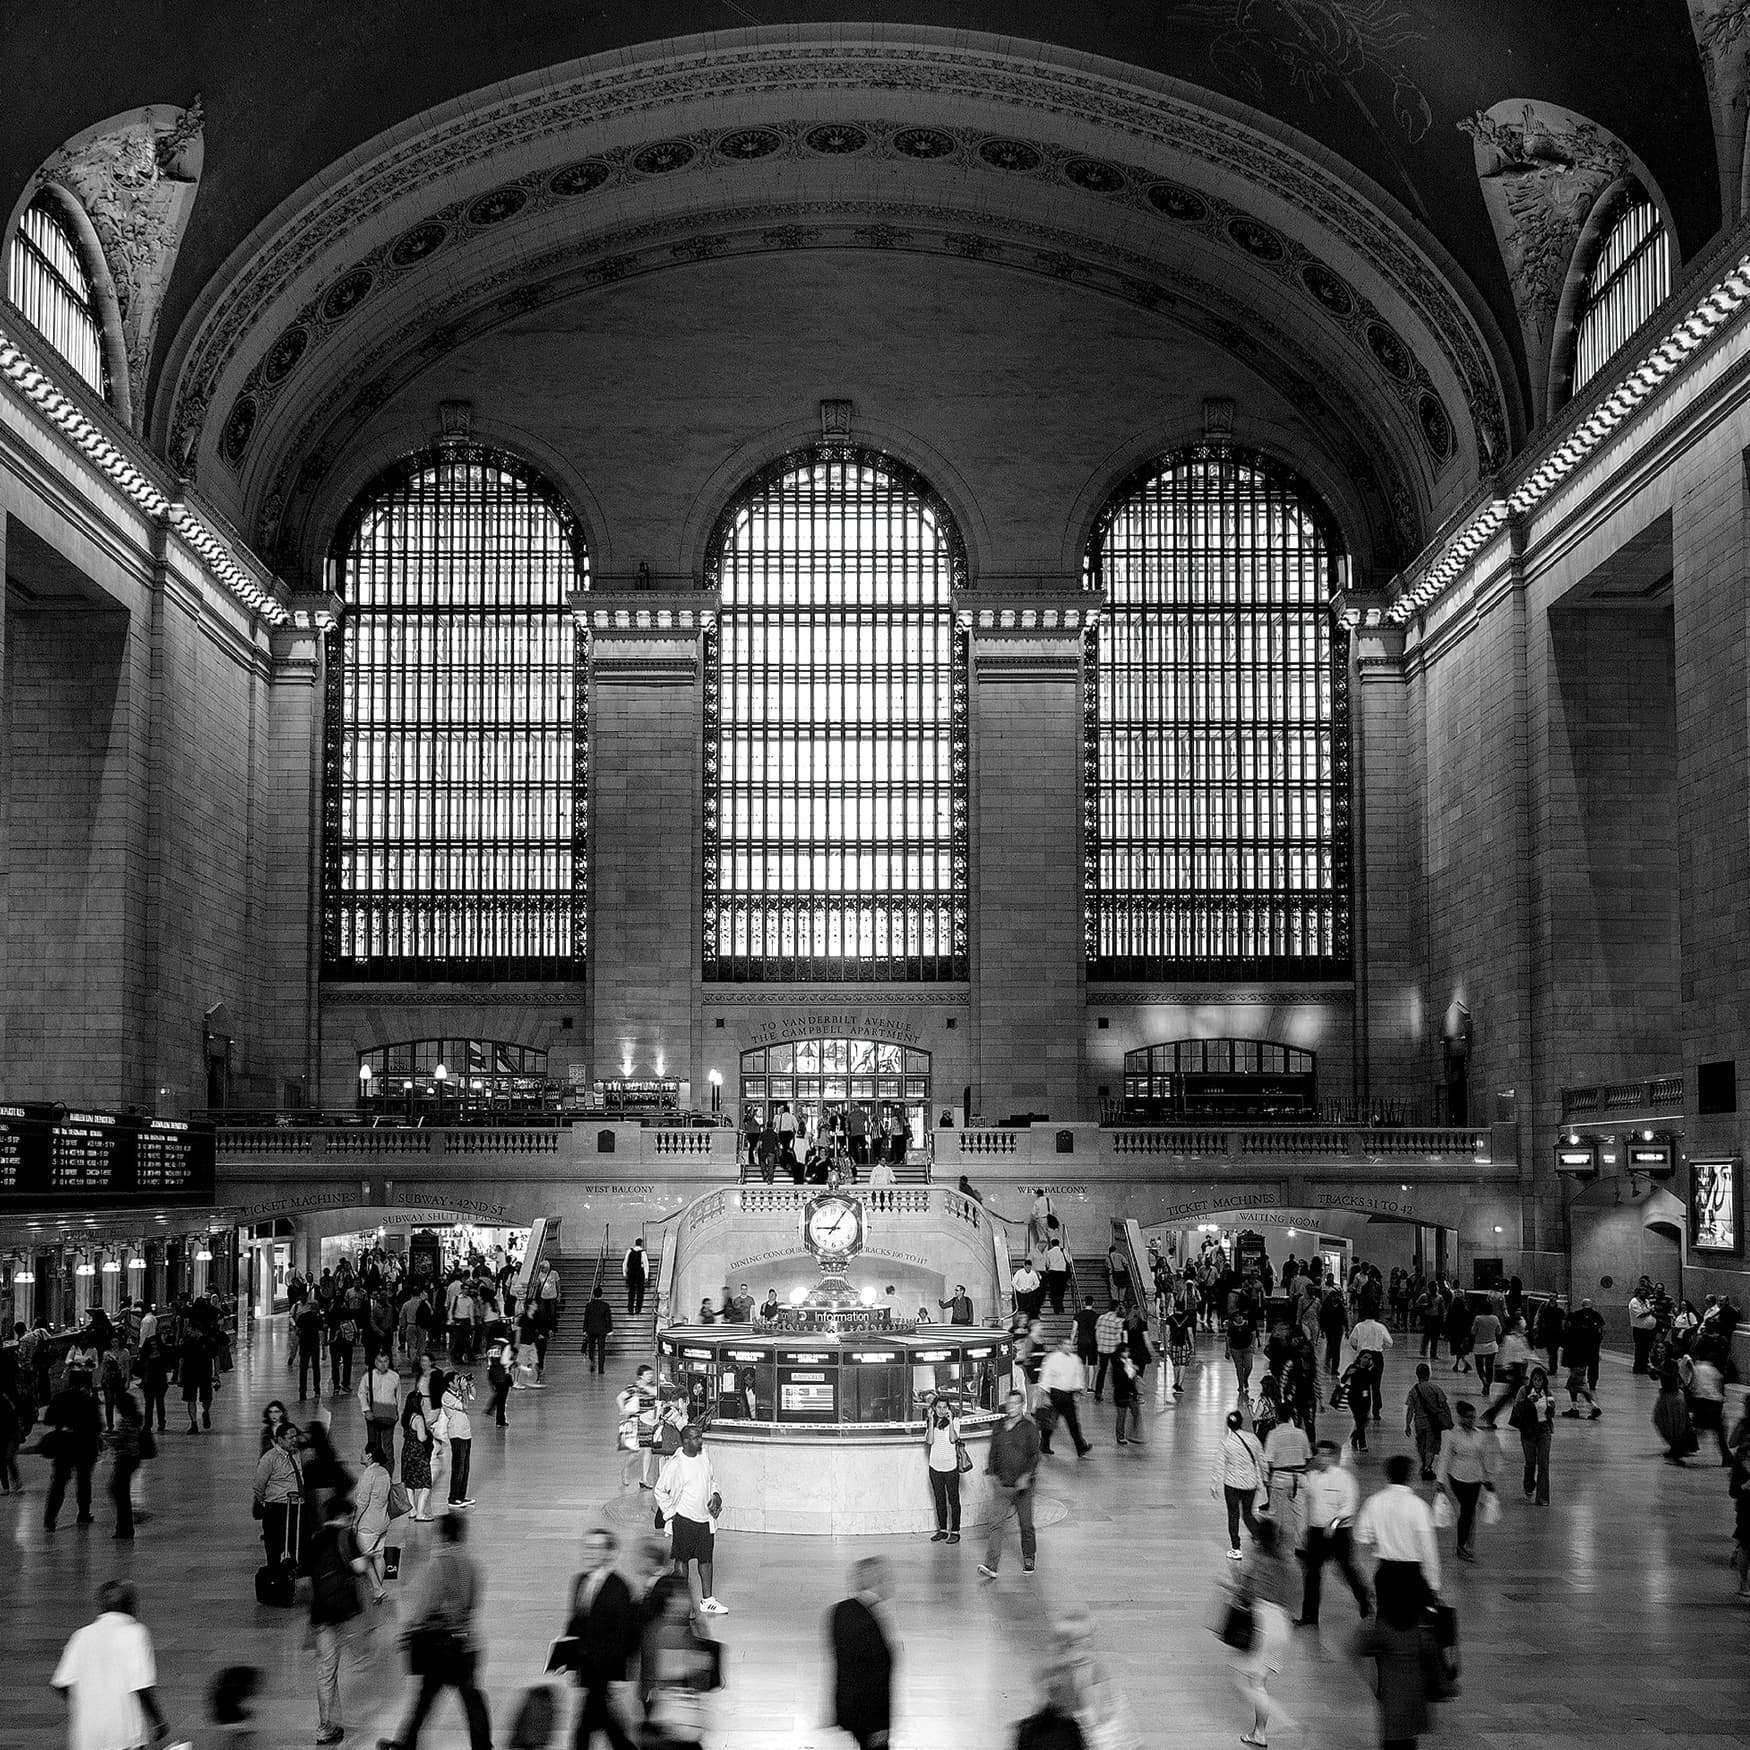 Black and white image of interior of Grand Central Terminal.